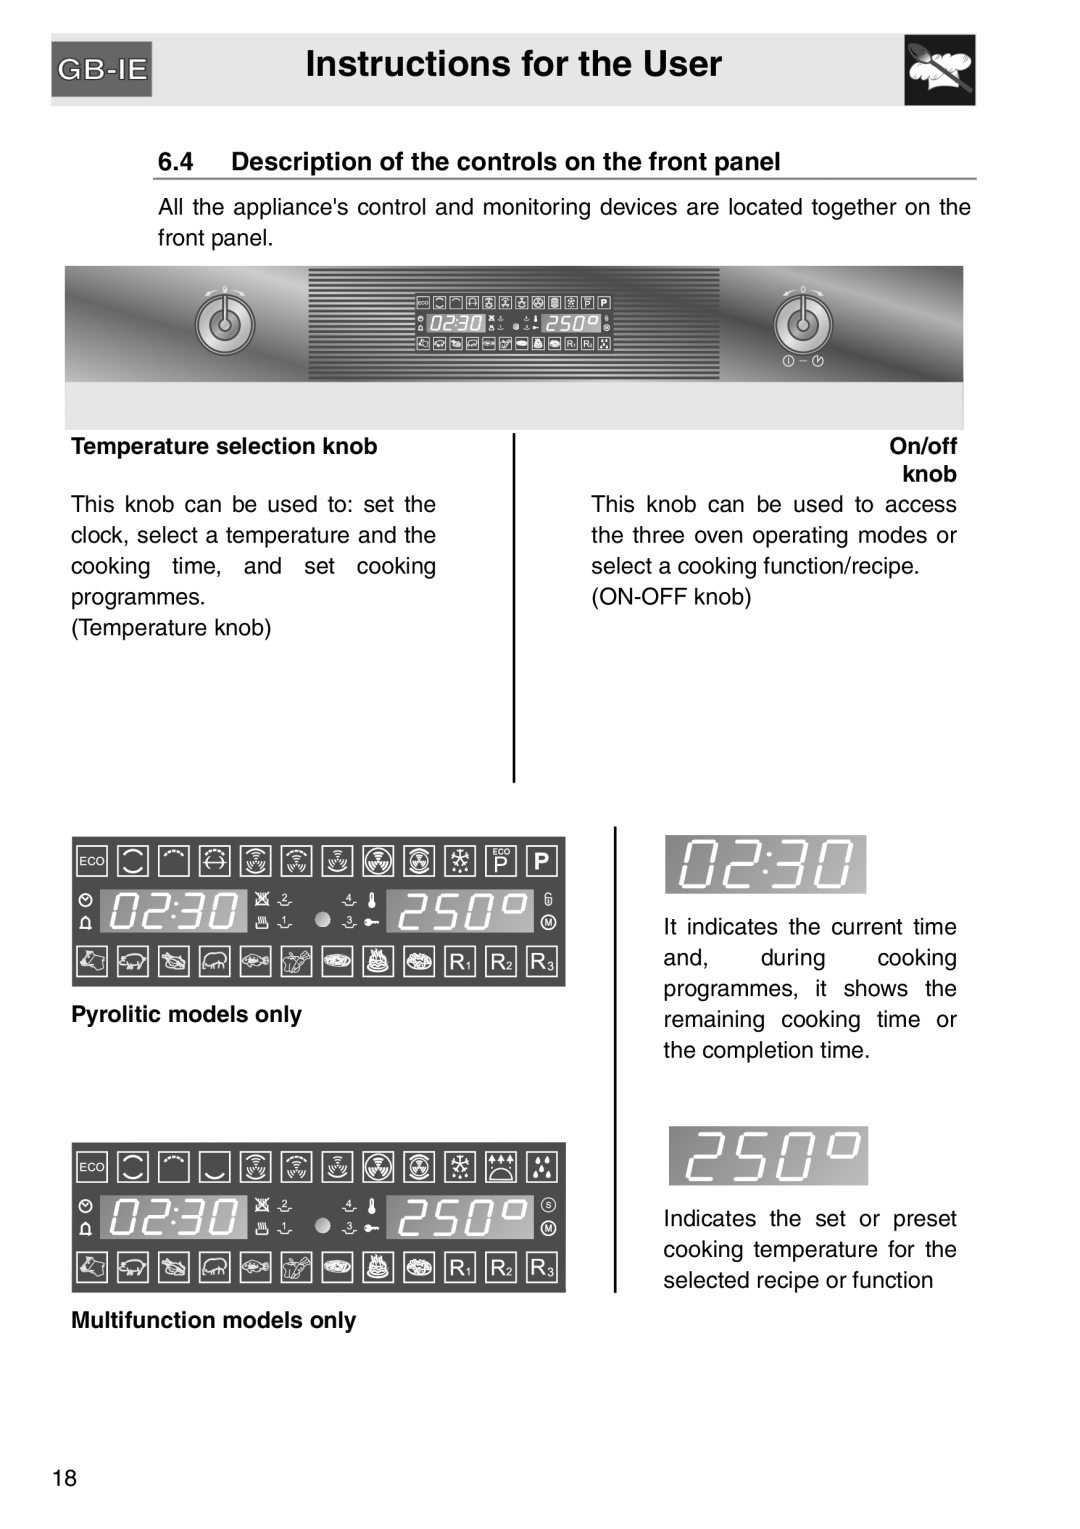 Smeg SAP112-8 Instructions for the User, 6.4Description of the controls on the front panel, Temperature selection knob 